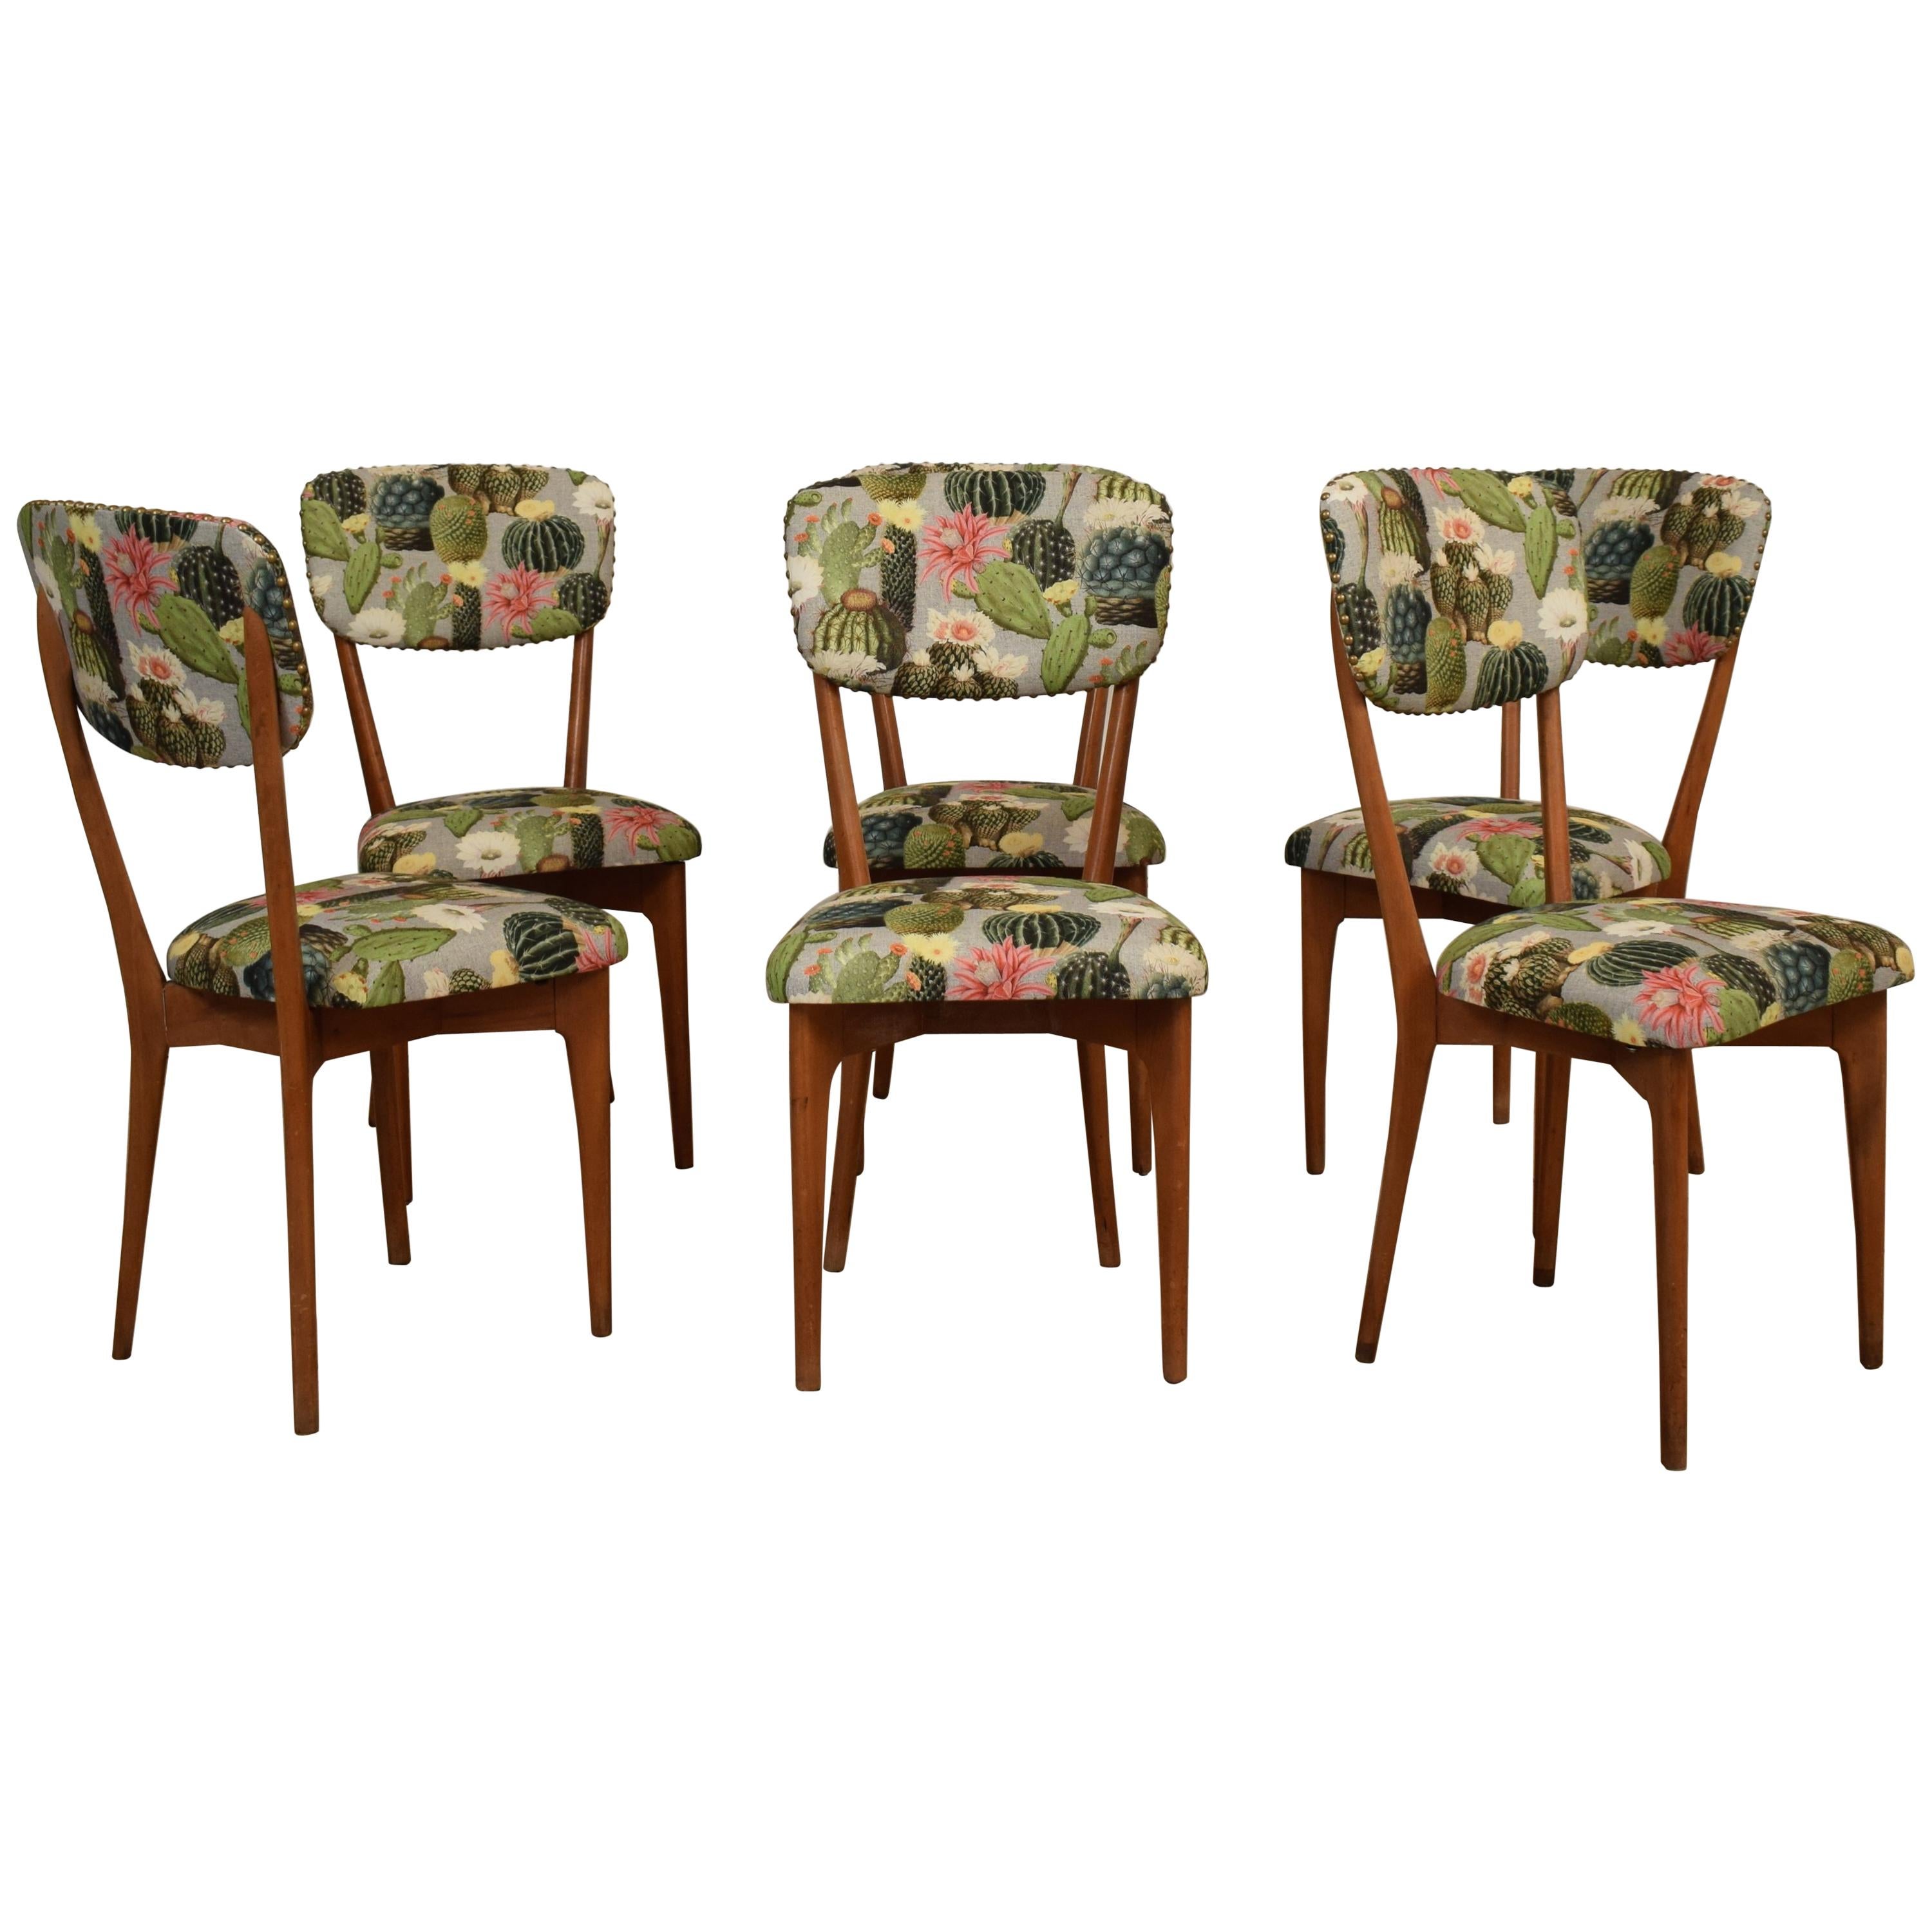 Set of Six Chairs by Ico Parisi Model "651", Italy, circa 1950